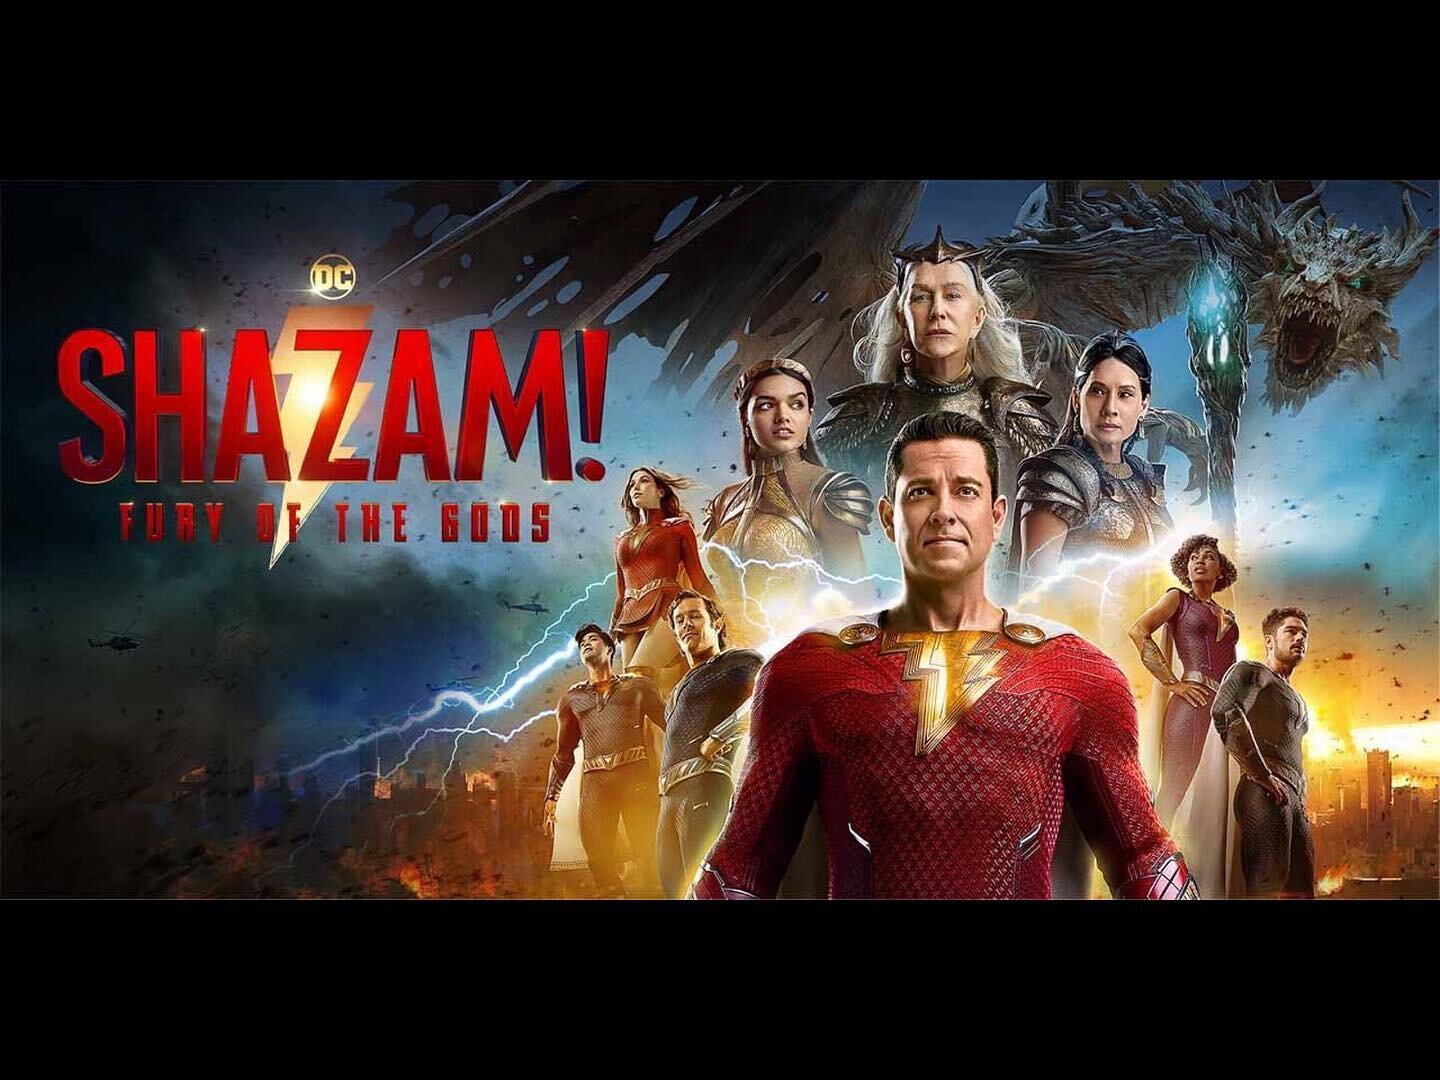 Had a blast writing some epic jams with @christophebeck for @shazammovie ⚡️⚡️⚡️ Check it out in theaters and OST streaming now&mdash;literally all bangers 🤘🥁

This one was extra special for having the opportunity to work with my super talented fell